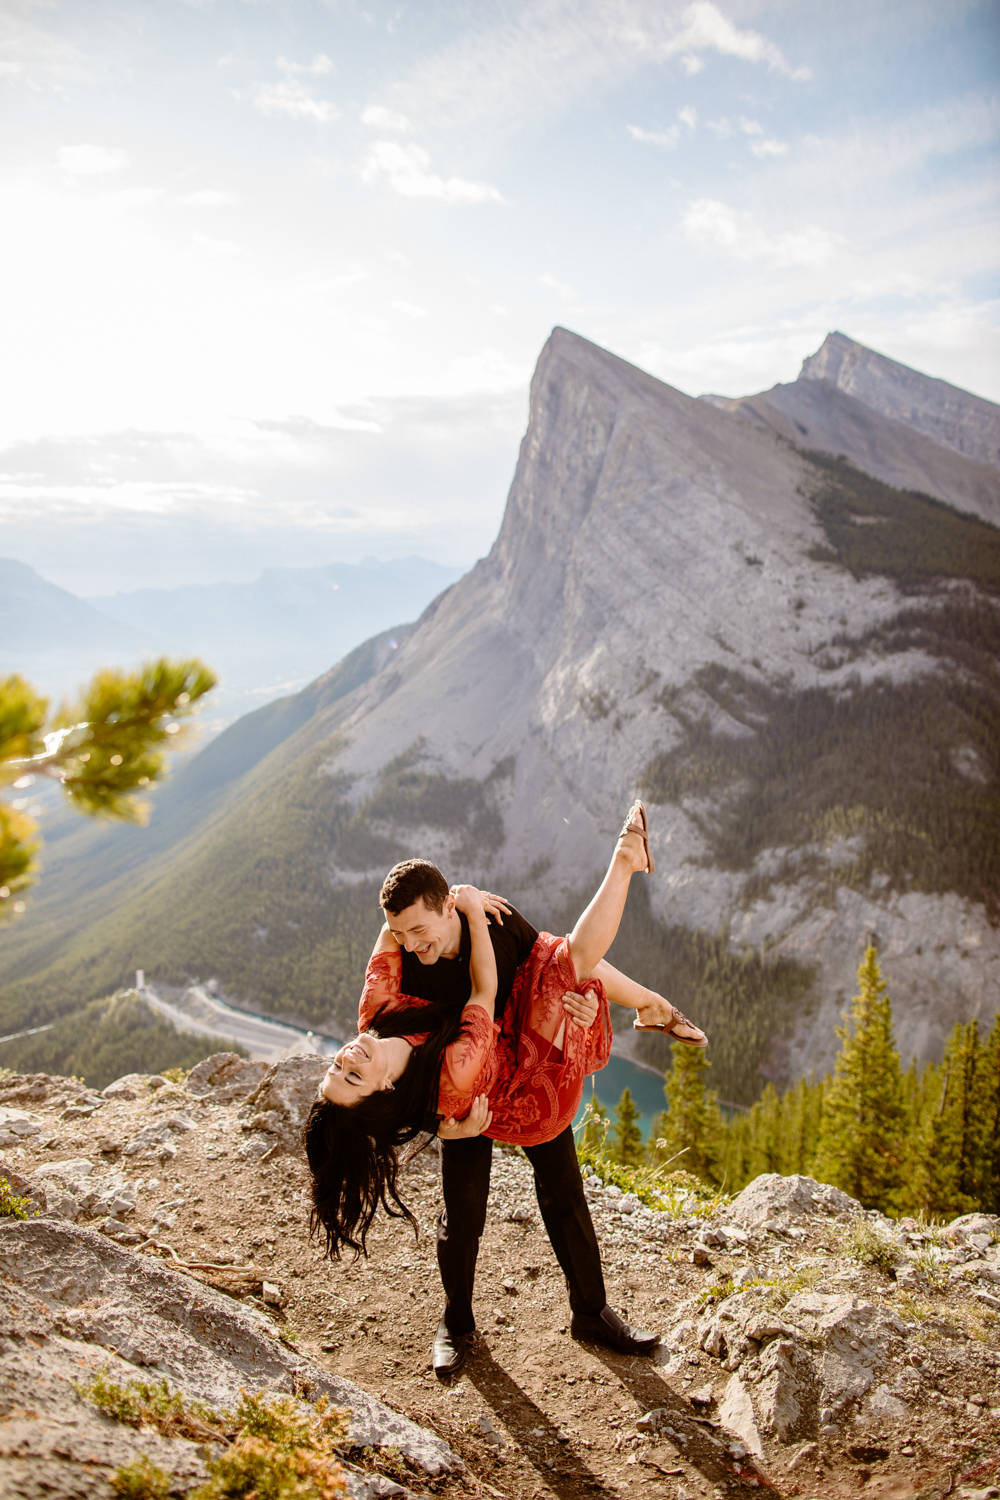 Banff wedding photographer pricing packages - Photo 5